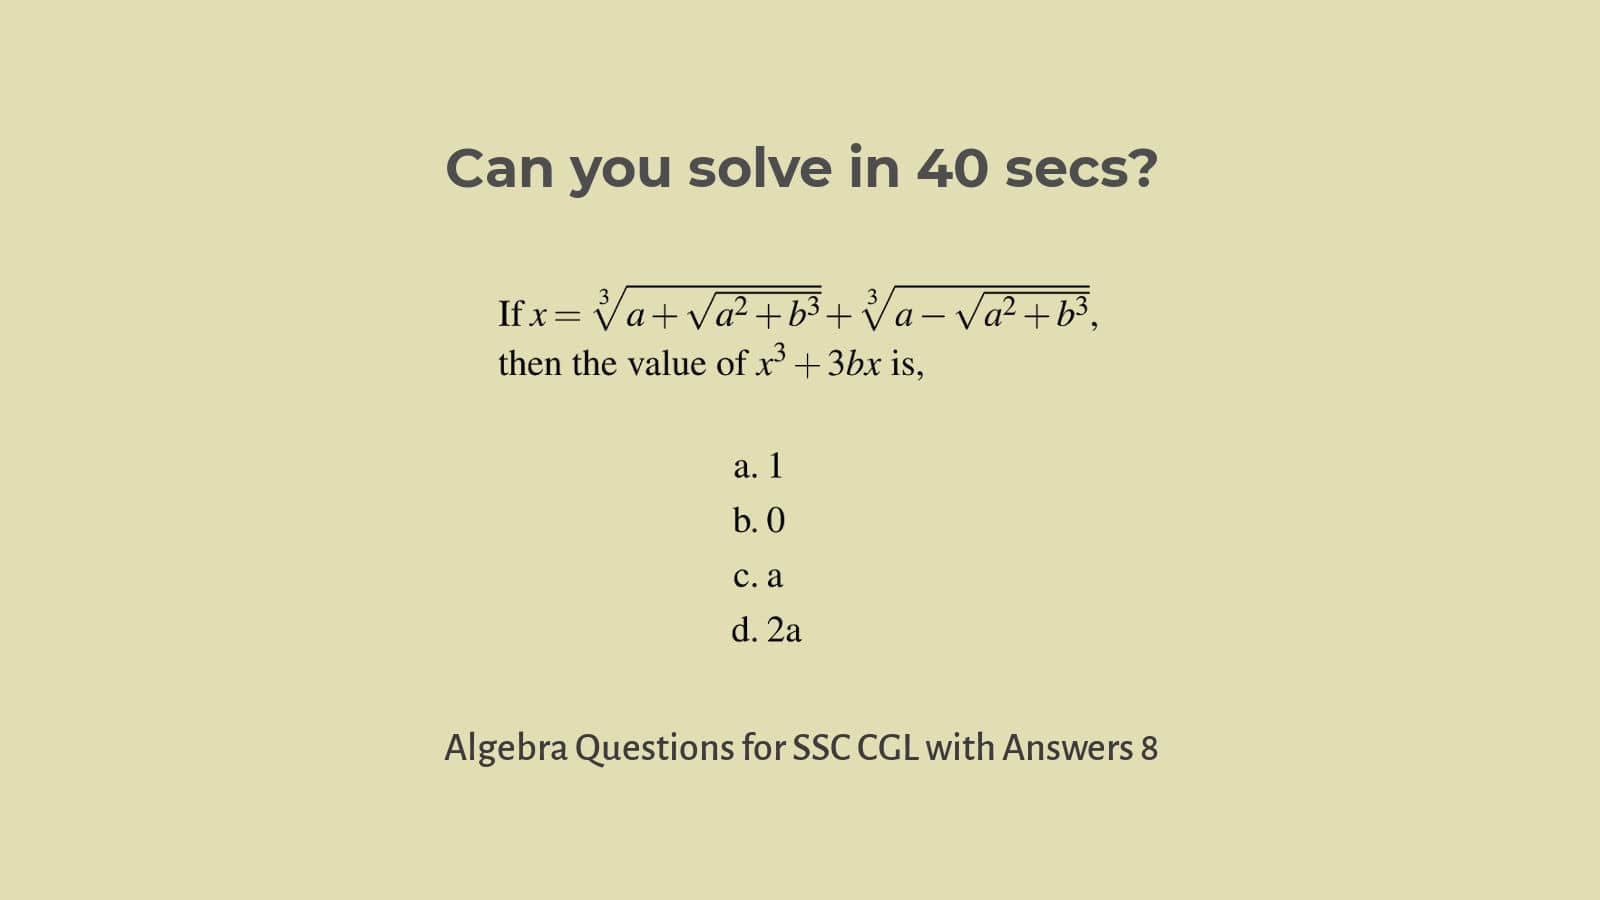 Algebra questions for SSC CGL  with answers set 8